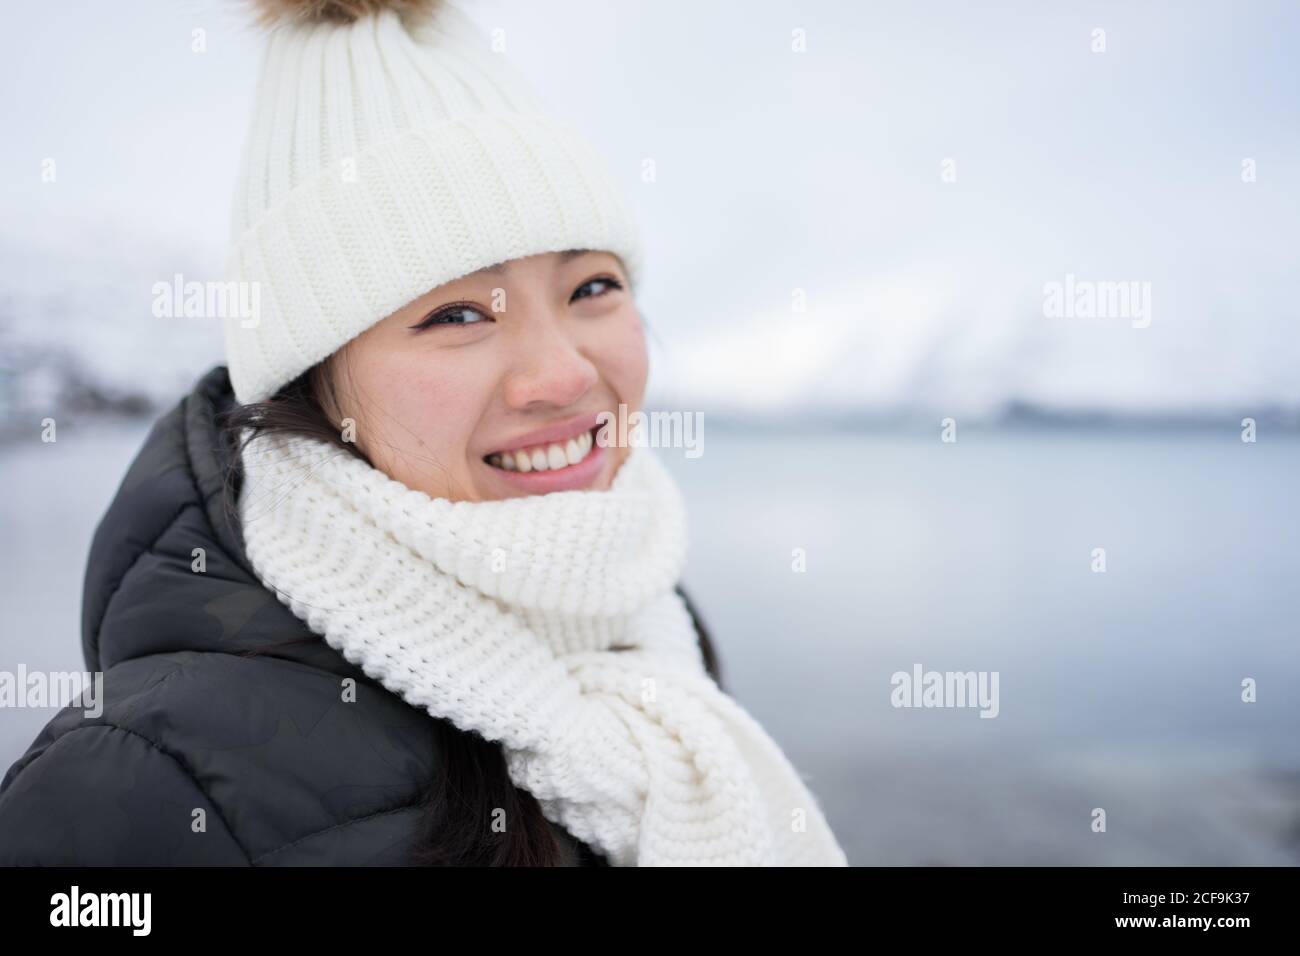 Happy Cam Female With Amazing Eyes In Black Jacket And White Warm Hat And Scarf Looking At Camera And Smiling Against Gray Blurred Background In Norway Stock Photo Alamy